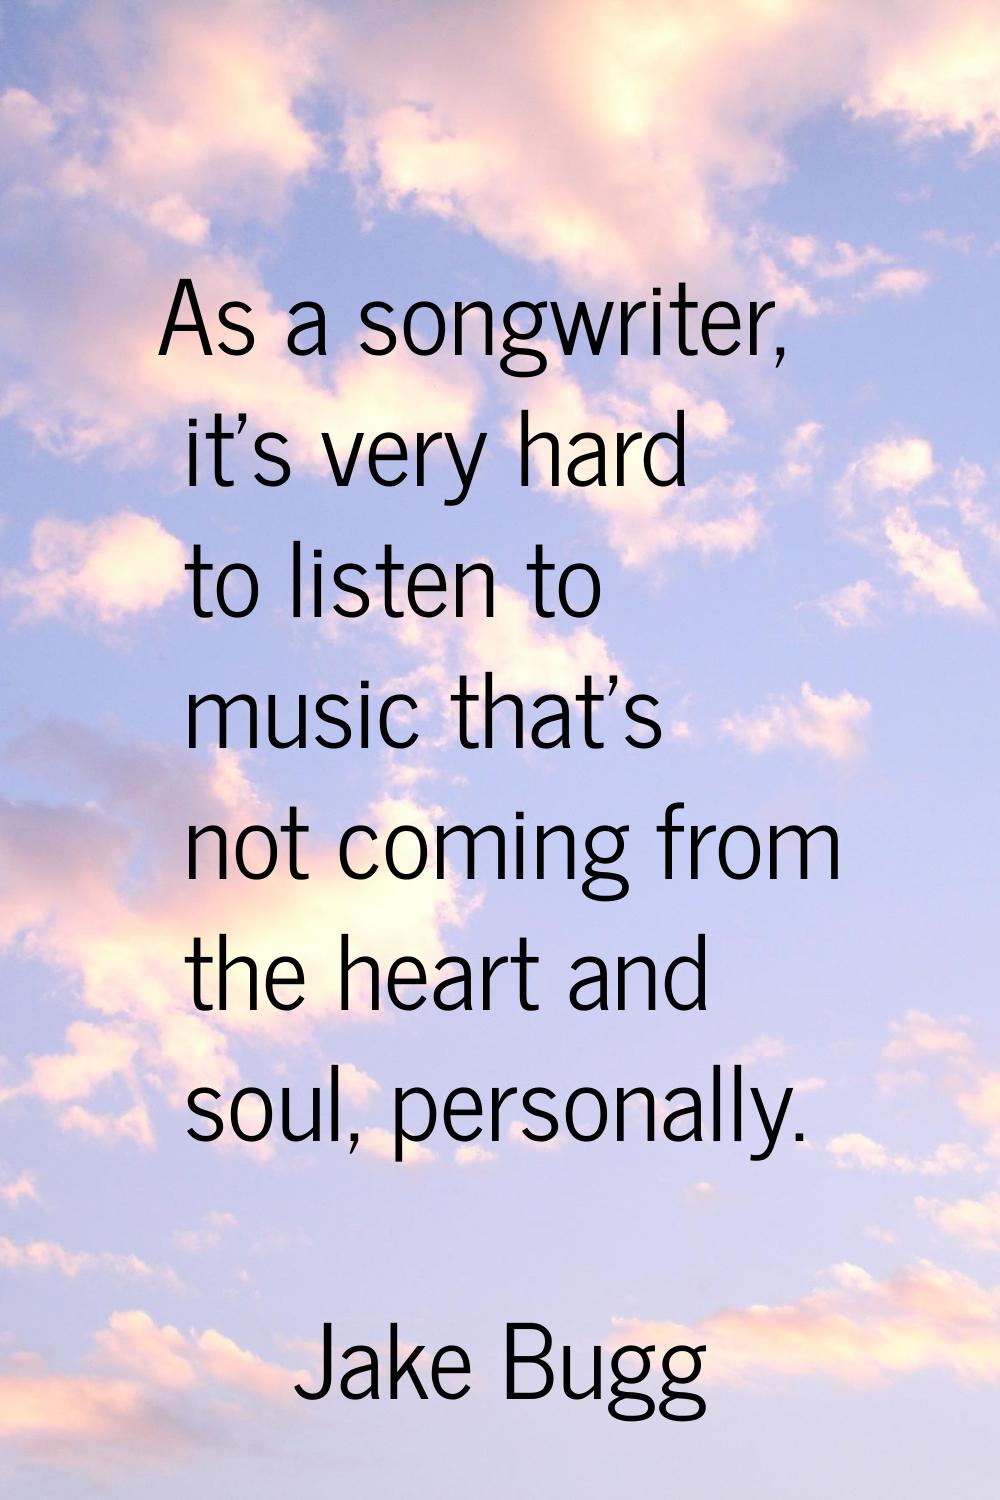 As a songwriter, it's very hard to listen to music that's not coming from the heart and soul, perso